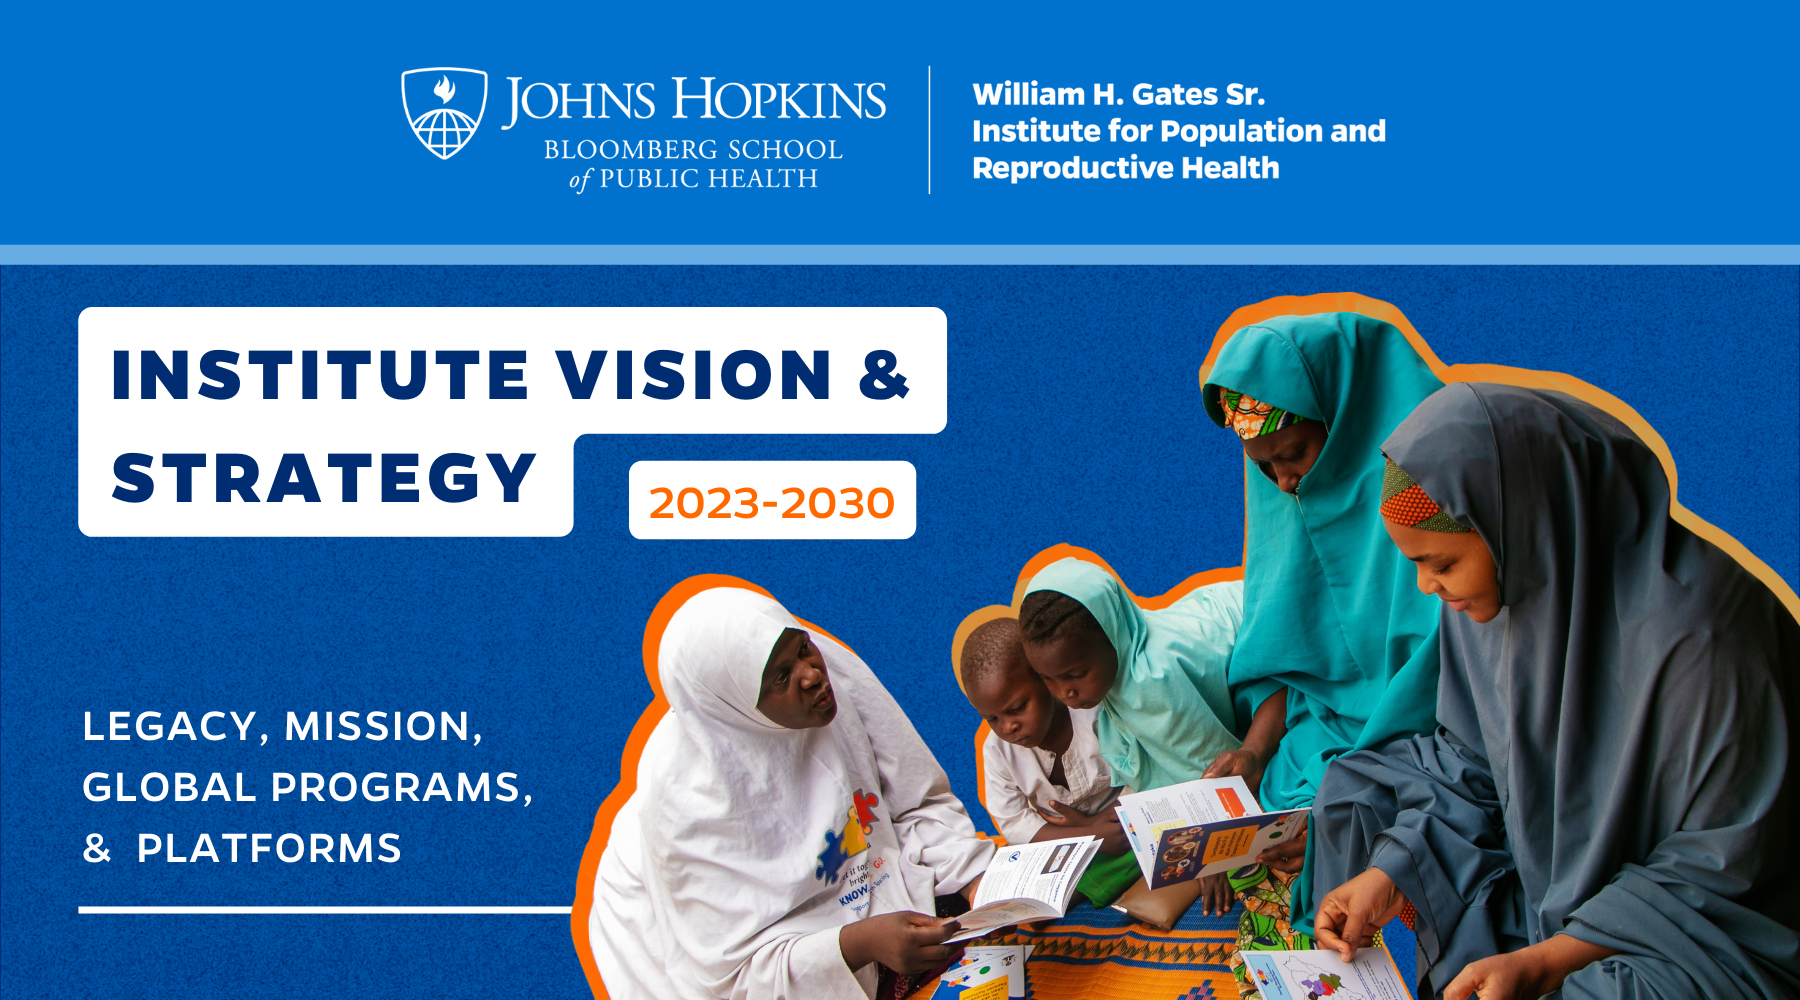 William H. Gates Sr. Institute for Population and Reproductive Health Unveils Refreshed Strategy through 2030